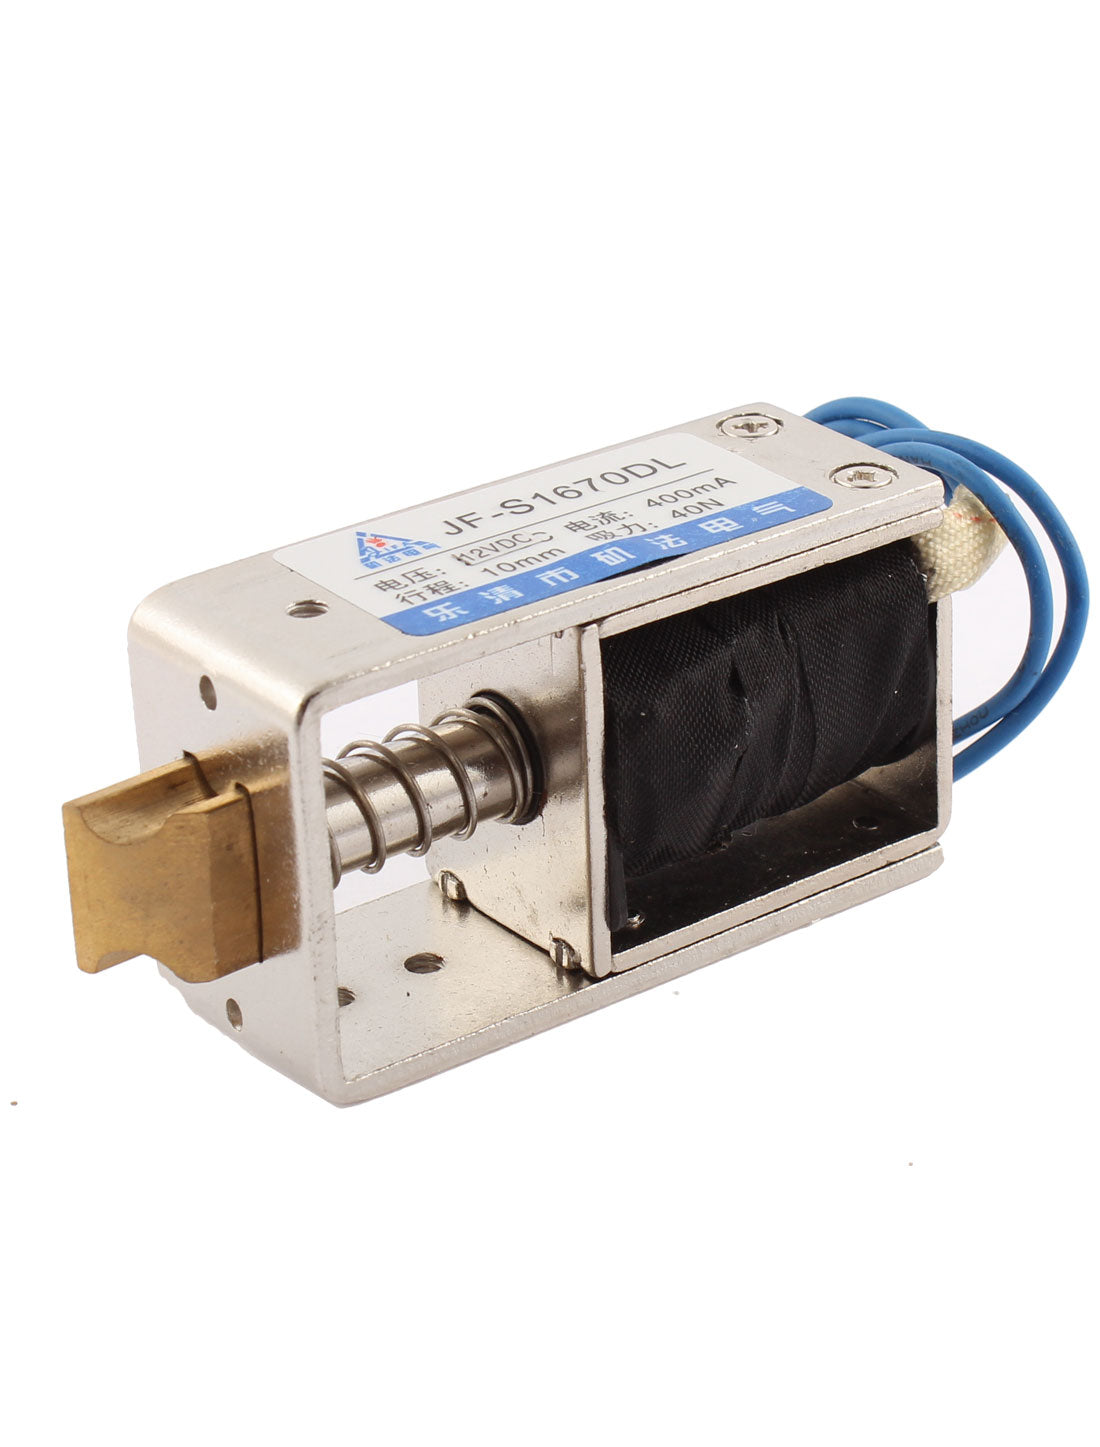 uxcell Uxcell DC 12V 400mA 10mm 40N Pull Type Open Frame Electromagnet Solenoid for Door Lock with Blue Wire